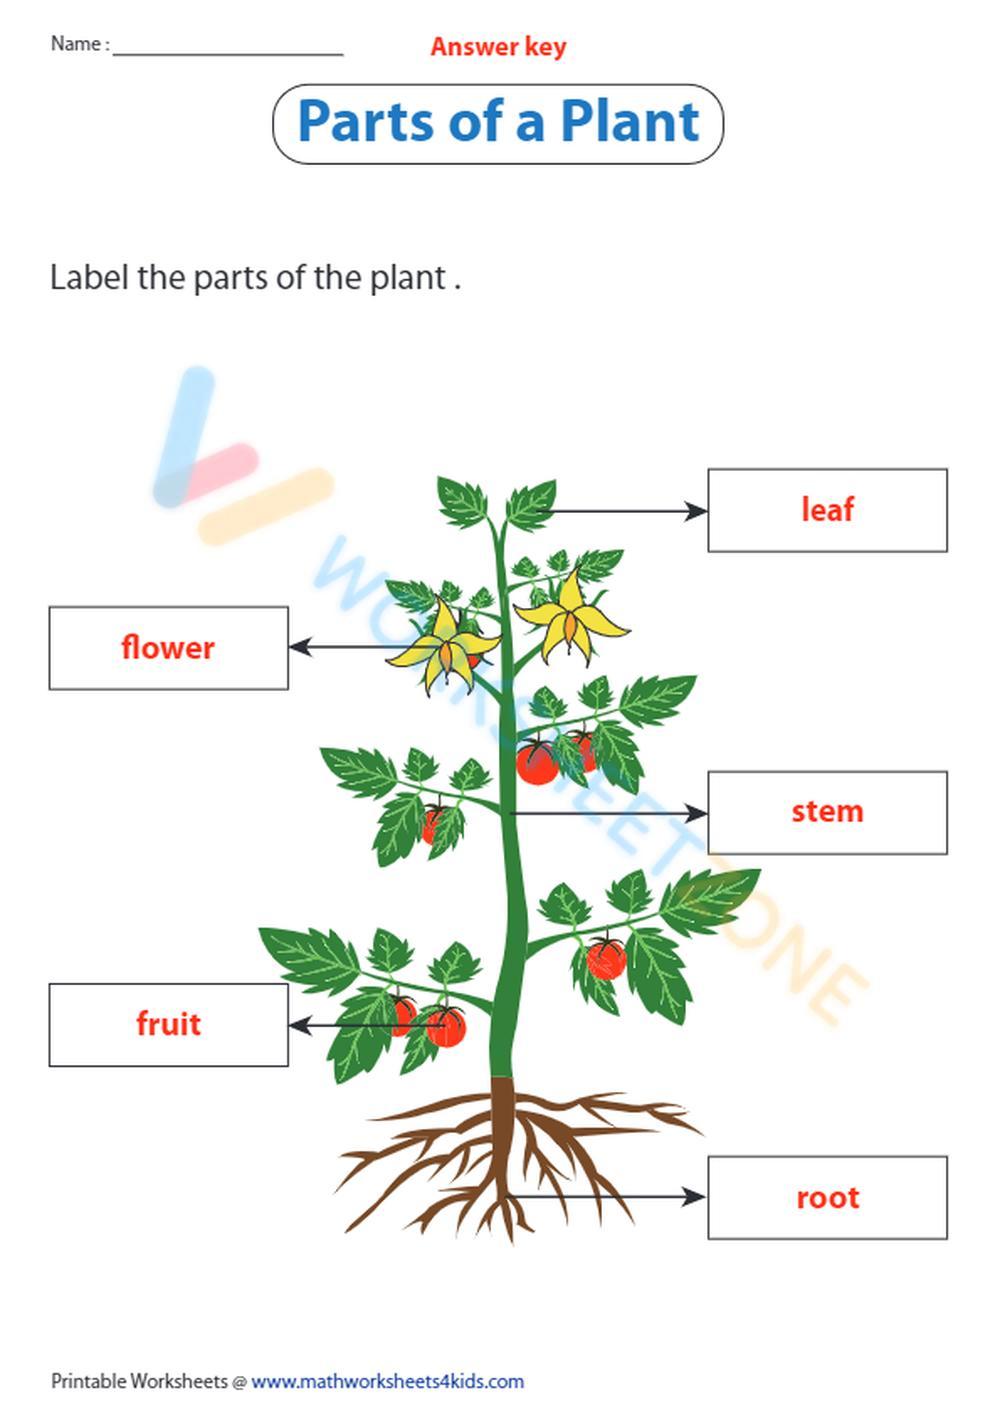 parts of a plant 2